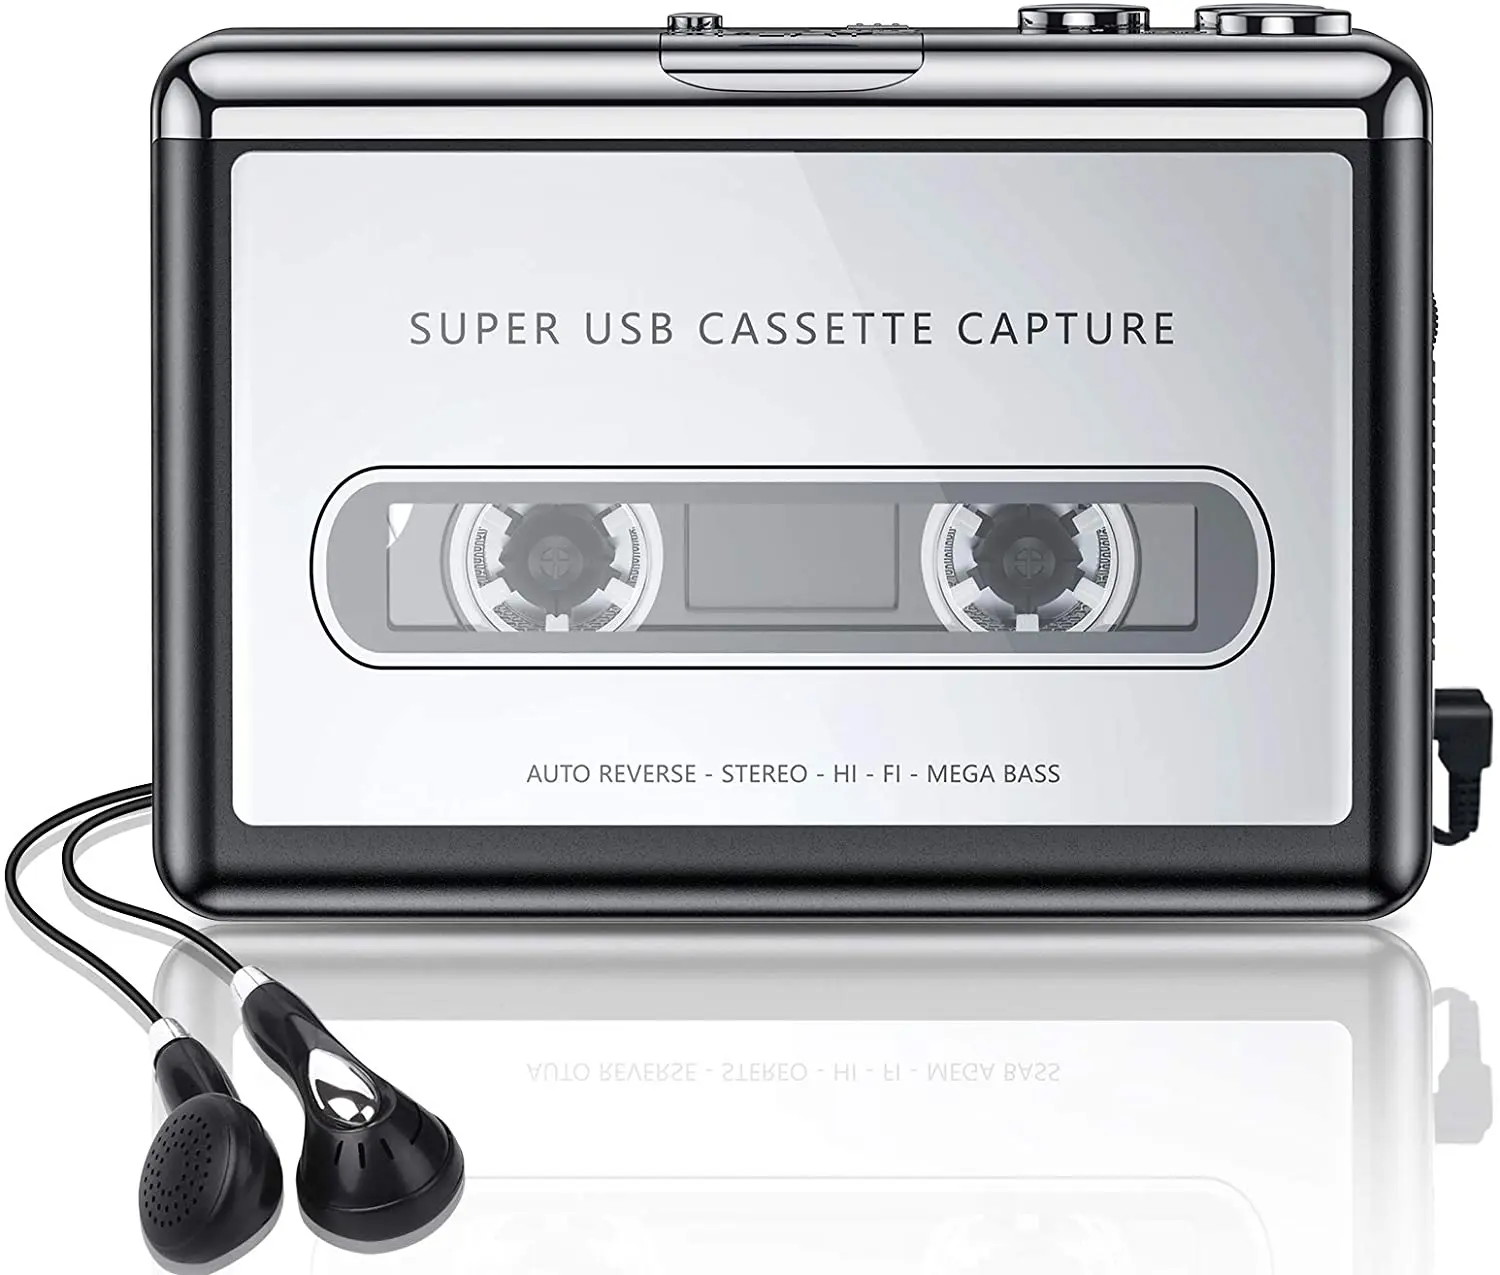 

2020 TOP selling Walkman Cassette Tape To MP3 CD Converter USB,Portable Cassette Tape Converter Captures MP3 Audio Music